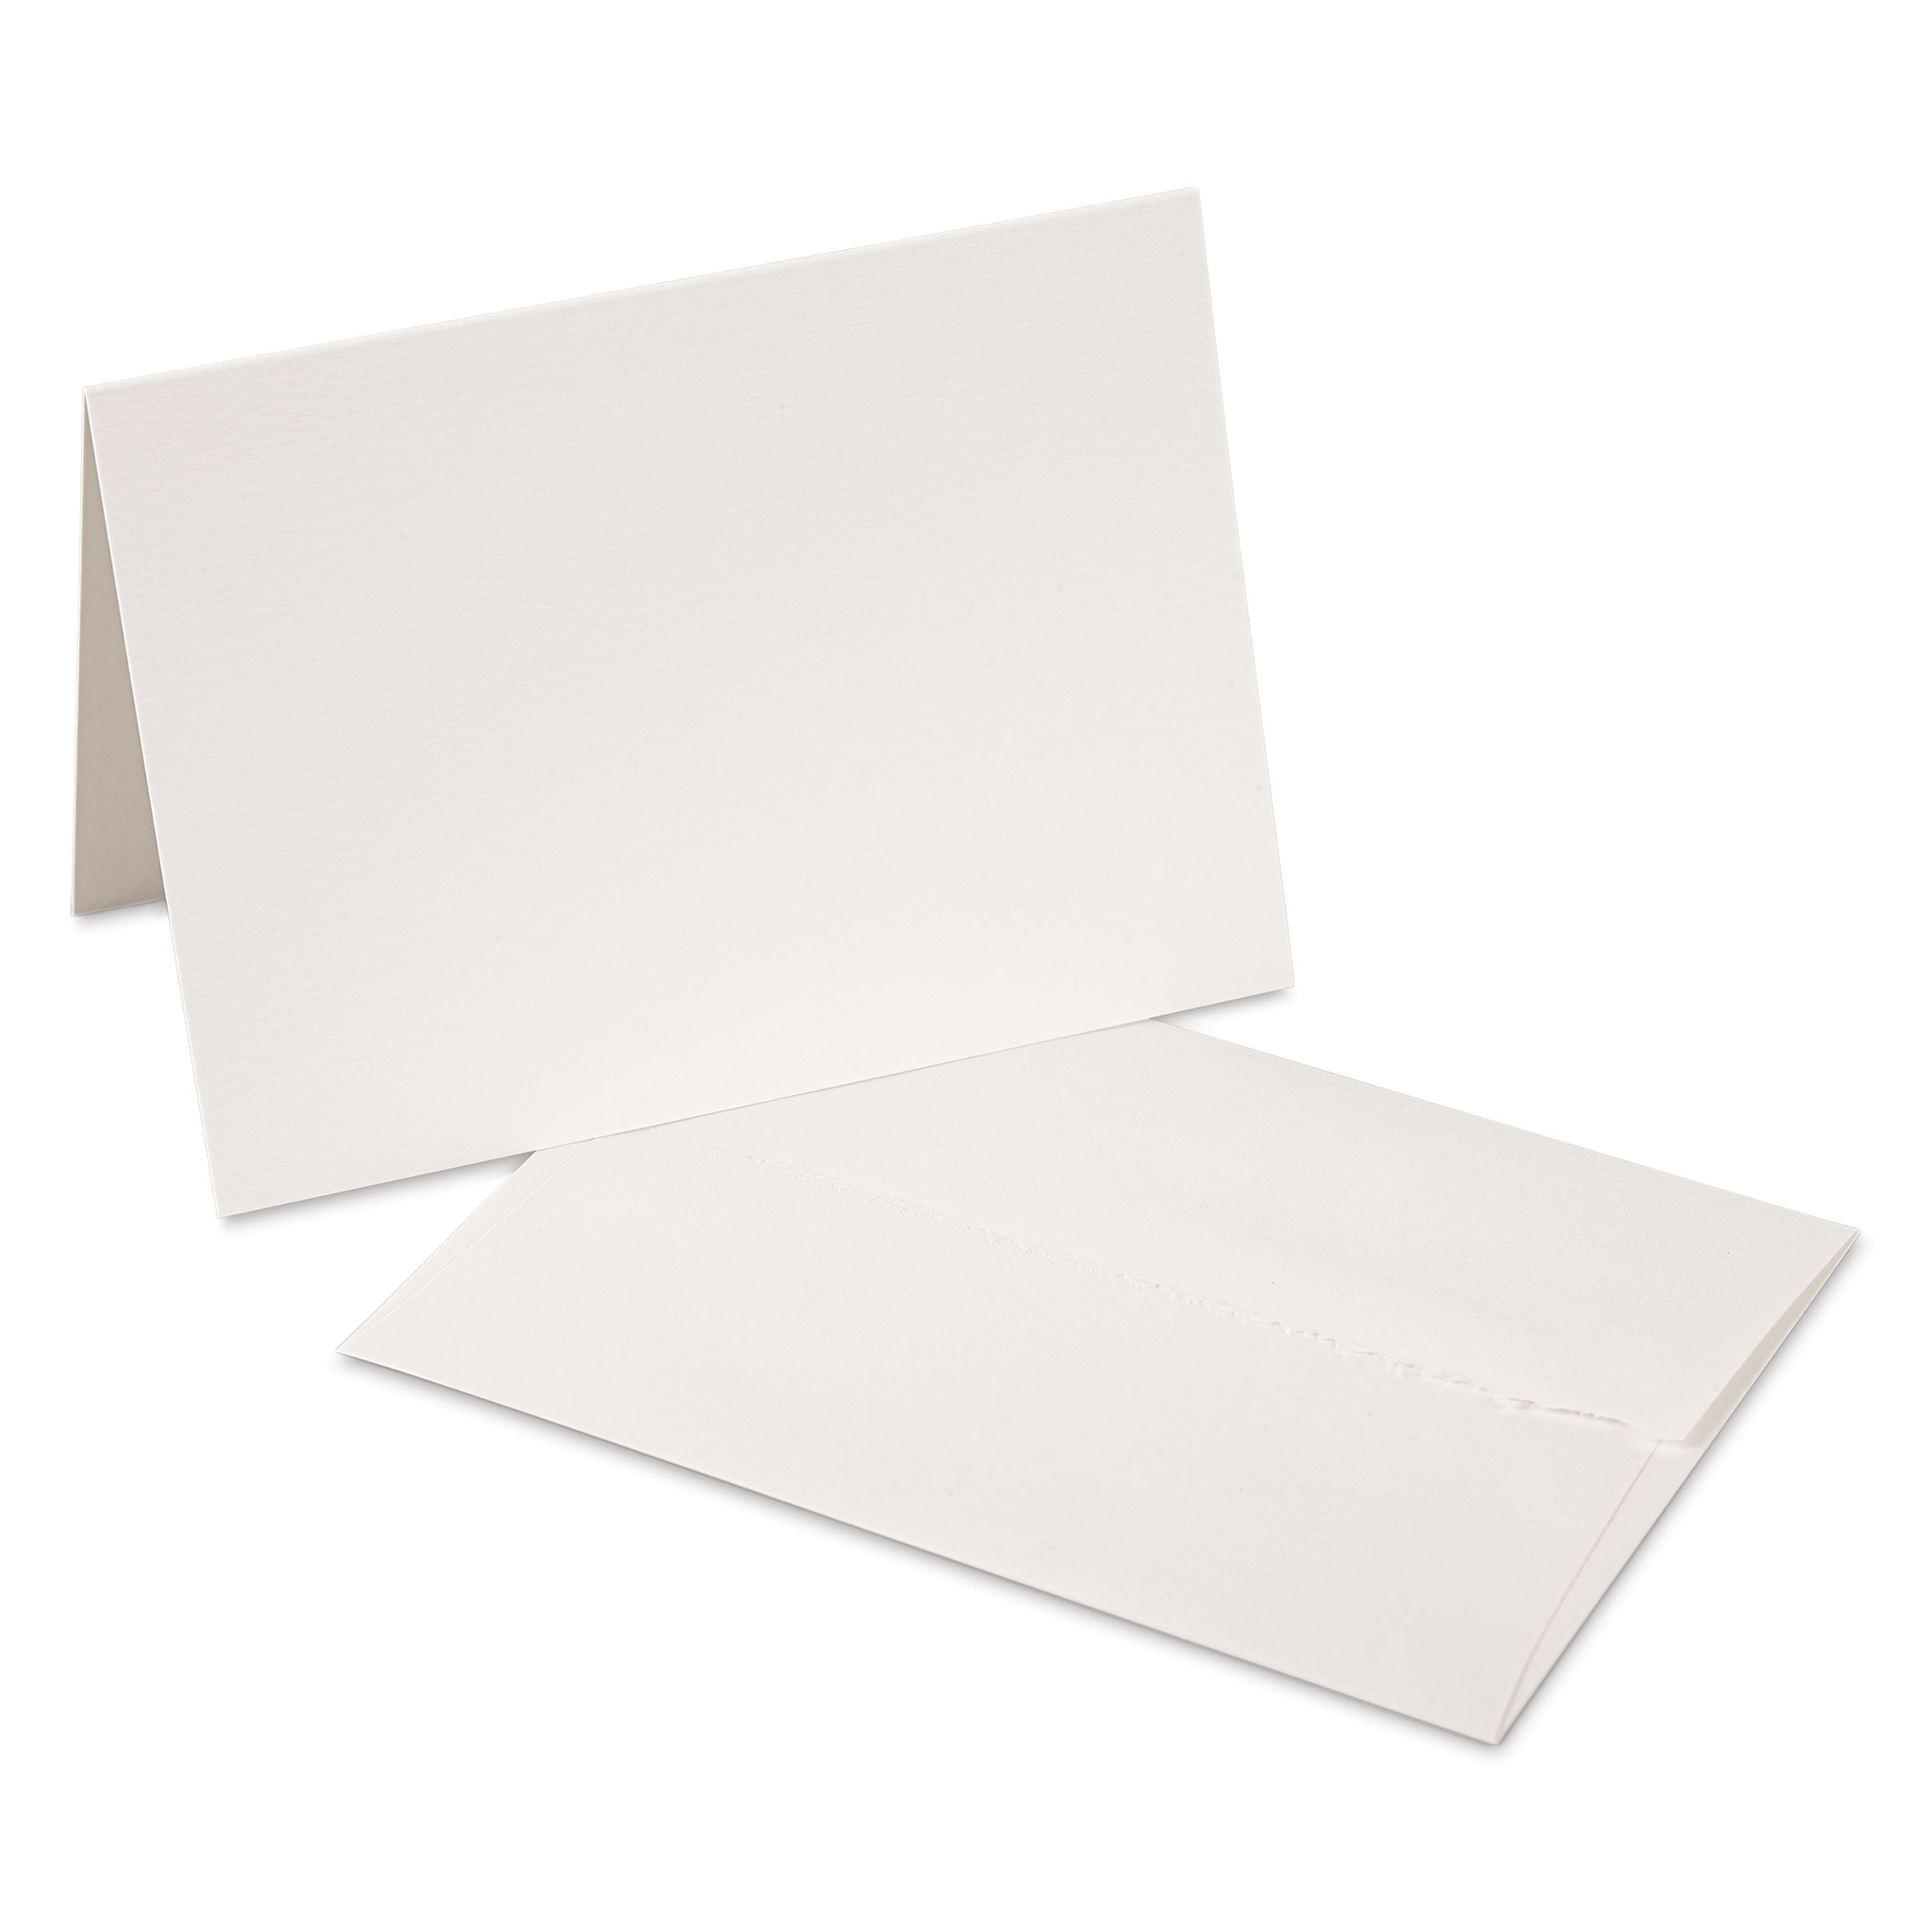 Strathmore 400 Series Watercolor Cards and Envelopes - 5 x 6-7/8, 10 Pack